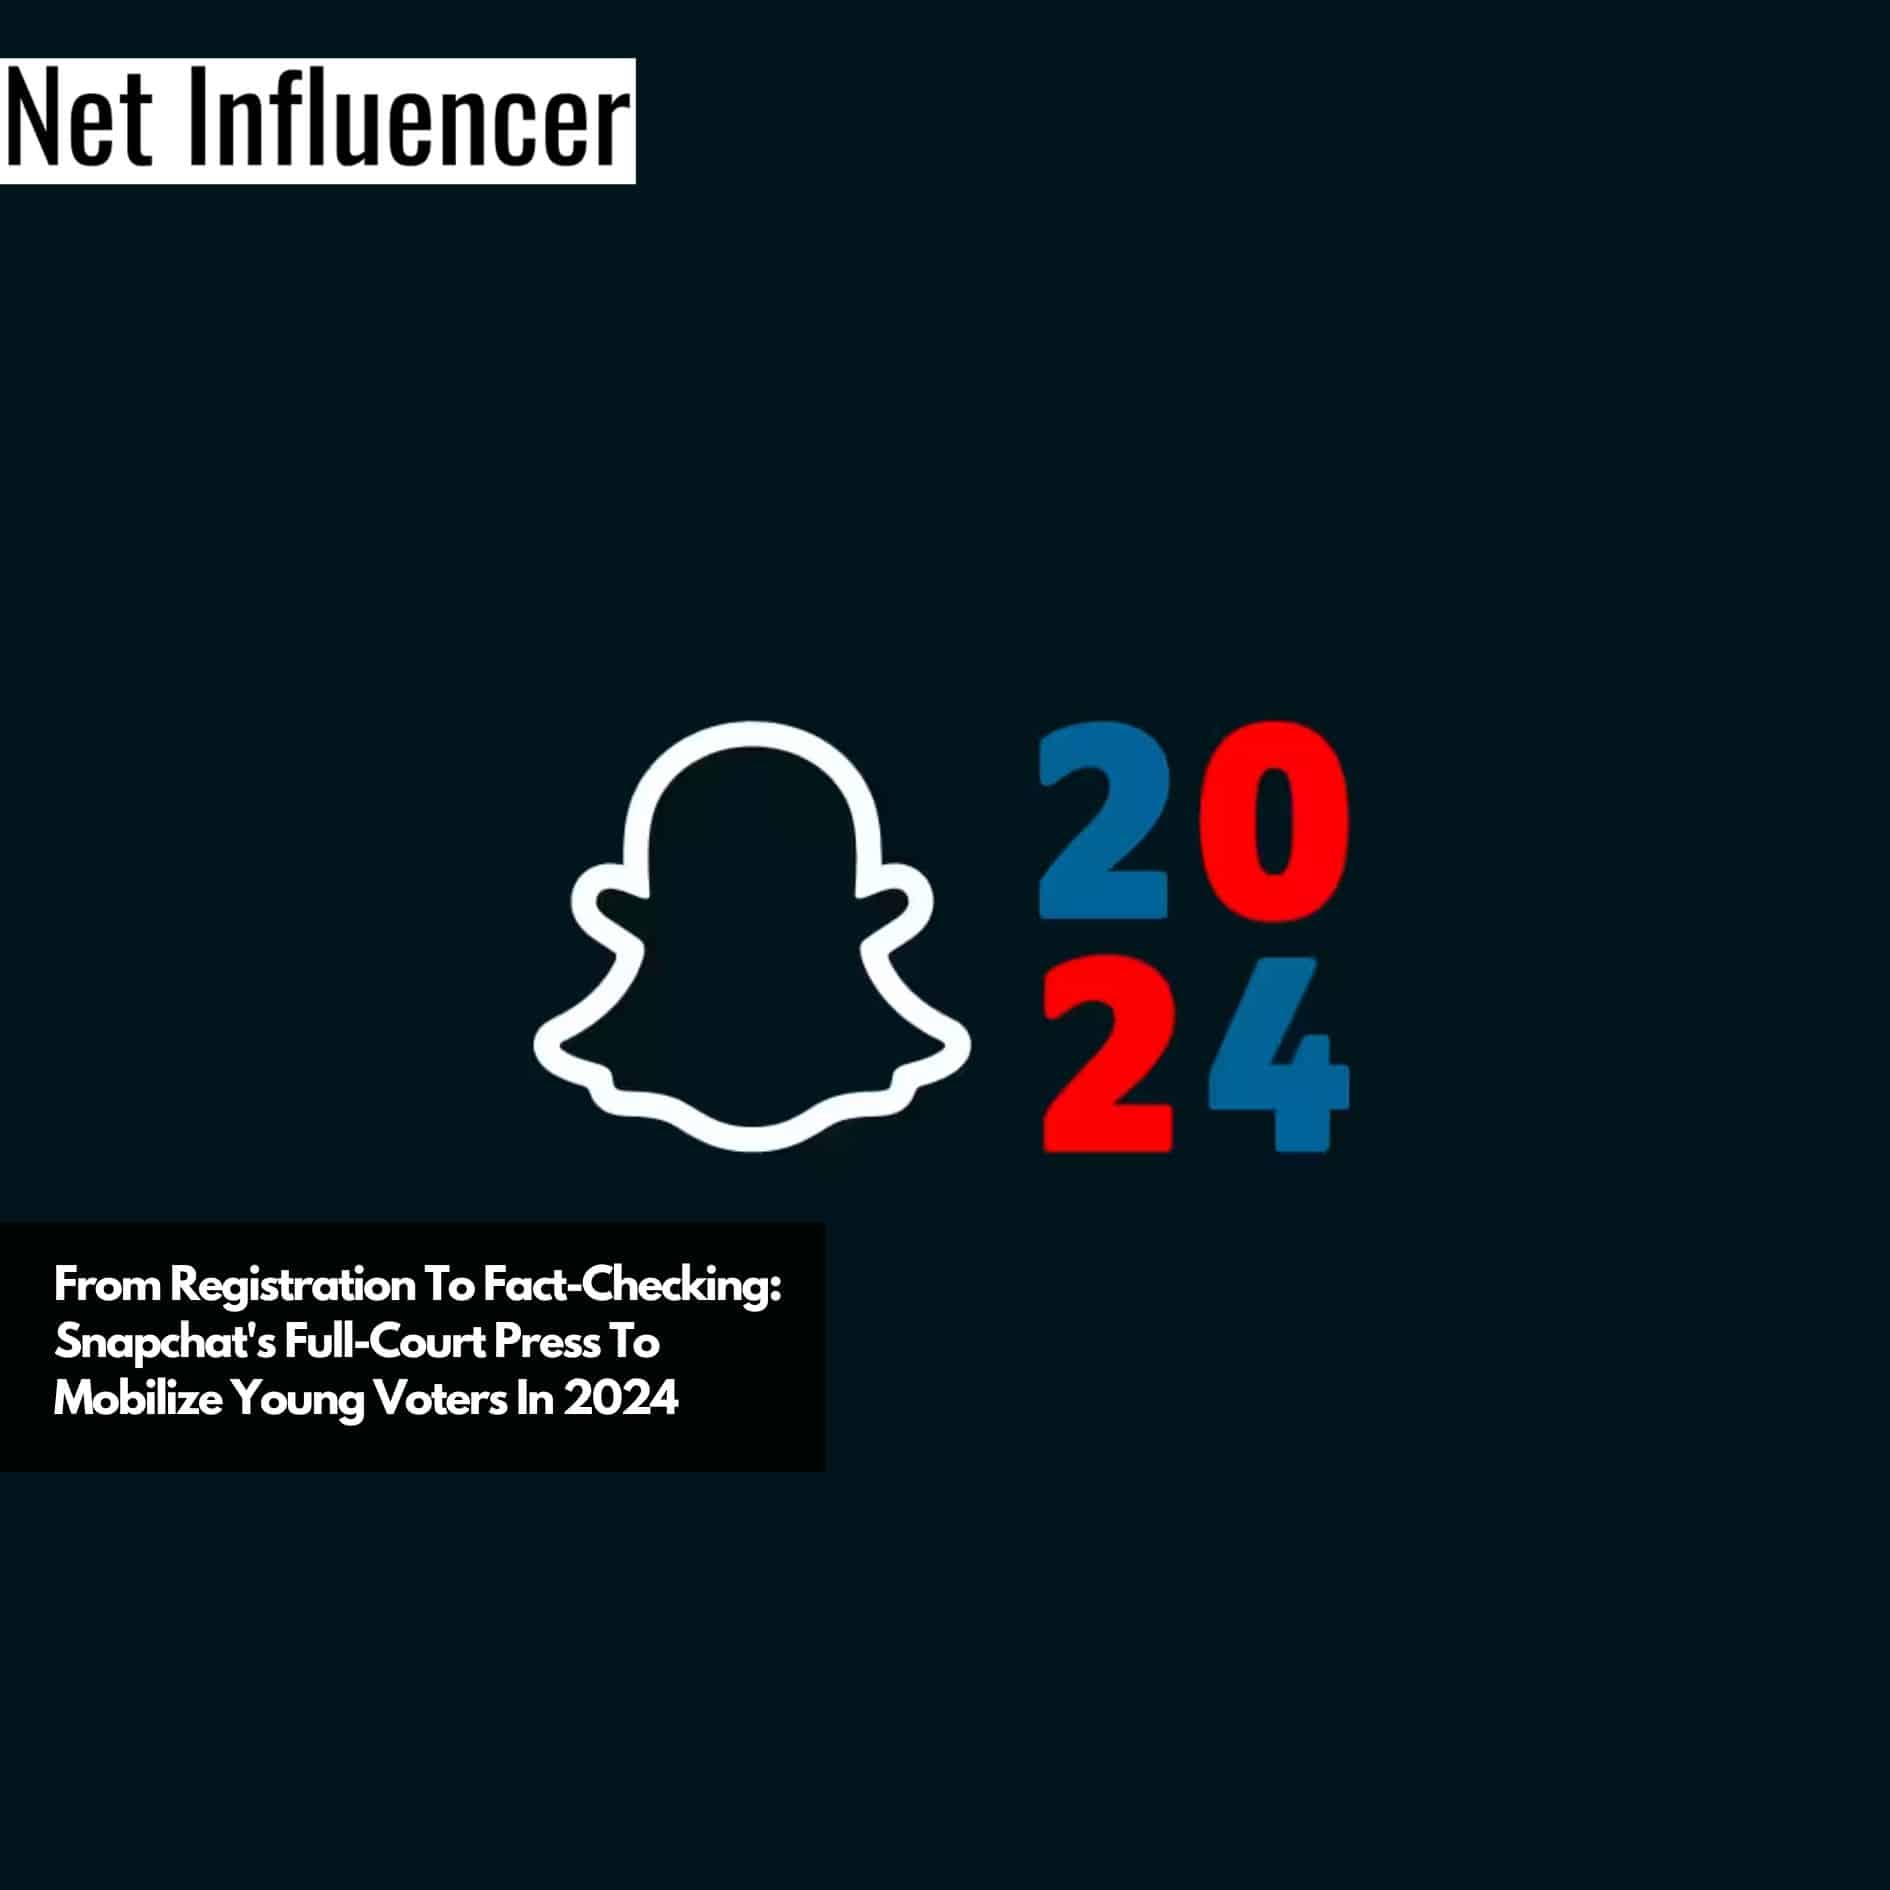 From Registration To Fact-Checking Snapchat's Full-Court Press To Mobilize Young Voters In 2024